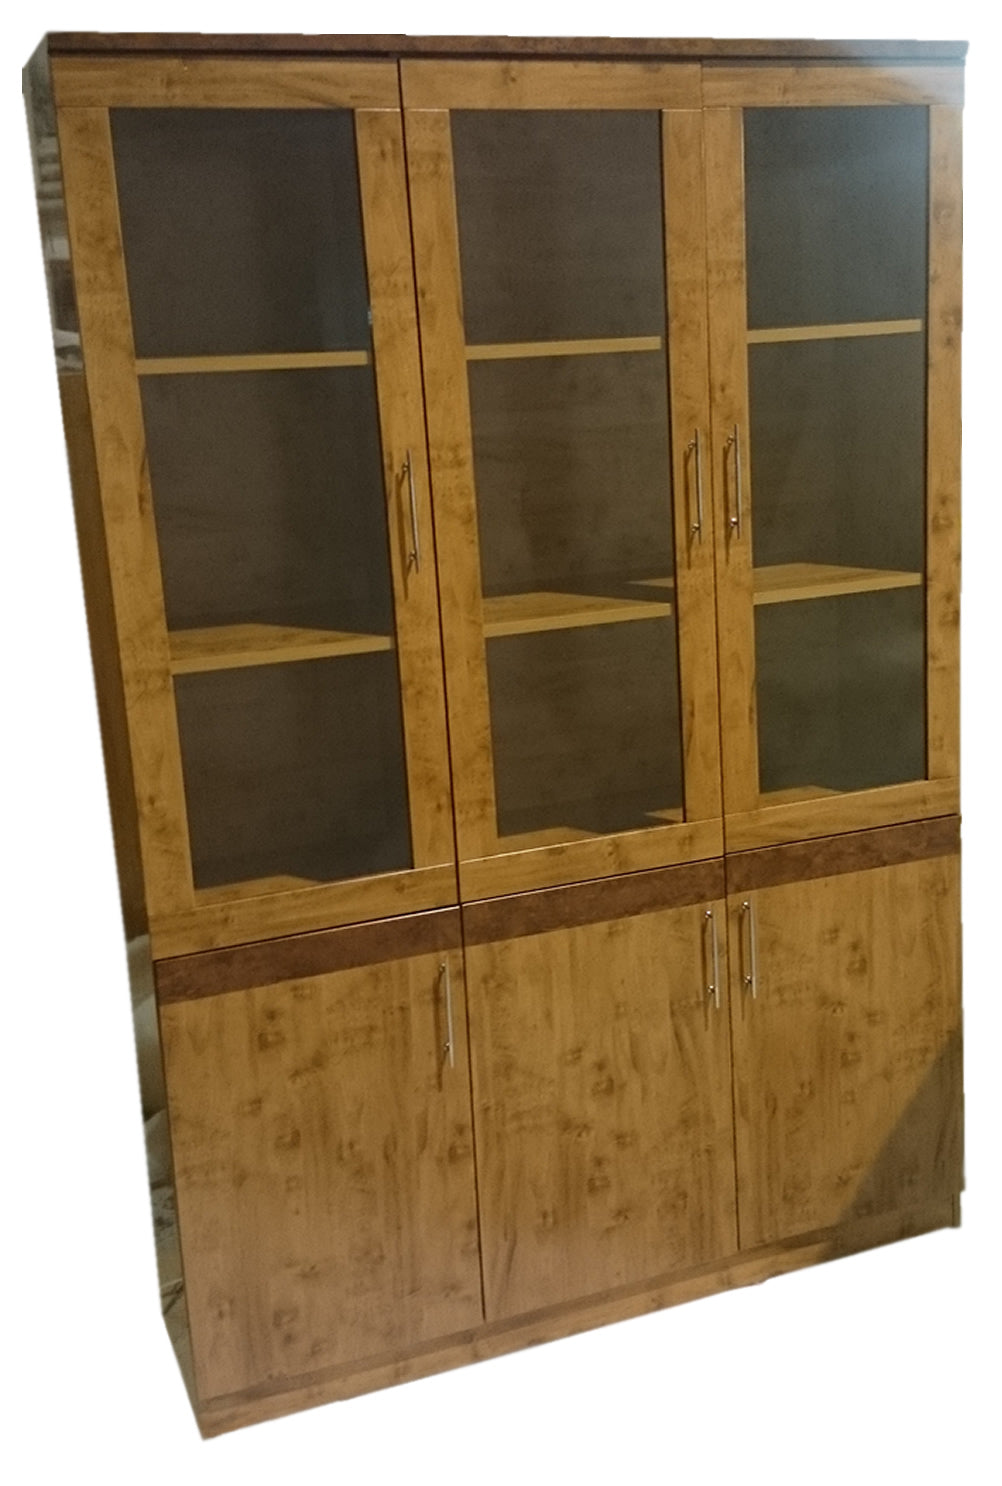 Yew Luxury Bookcase 3 Doors Wide DES-1862-192A-3DR UK